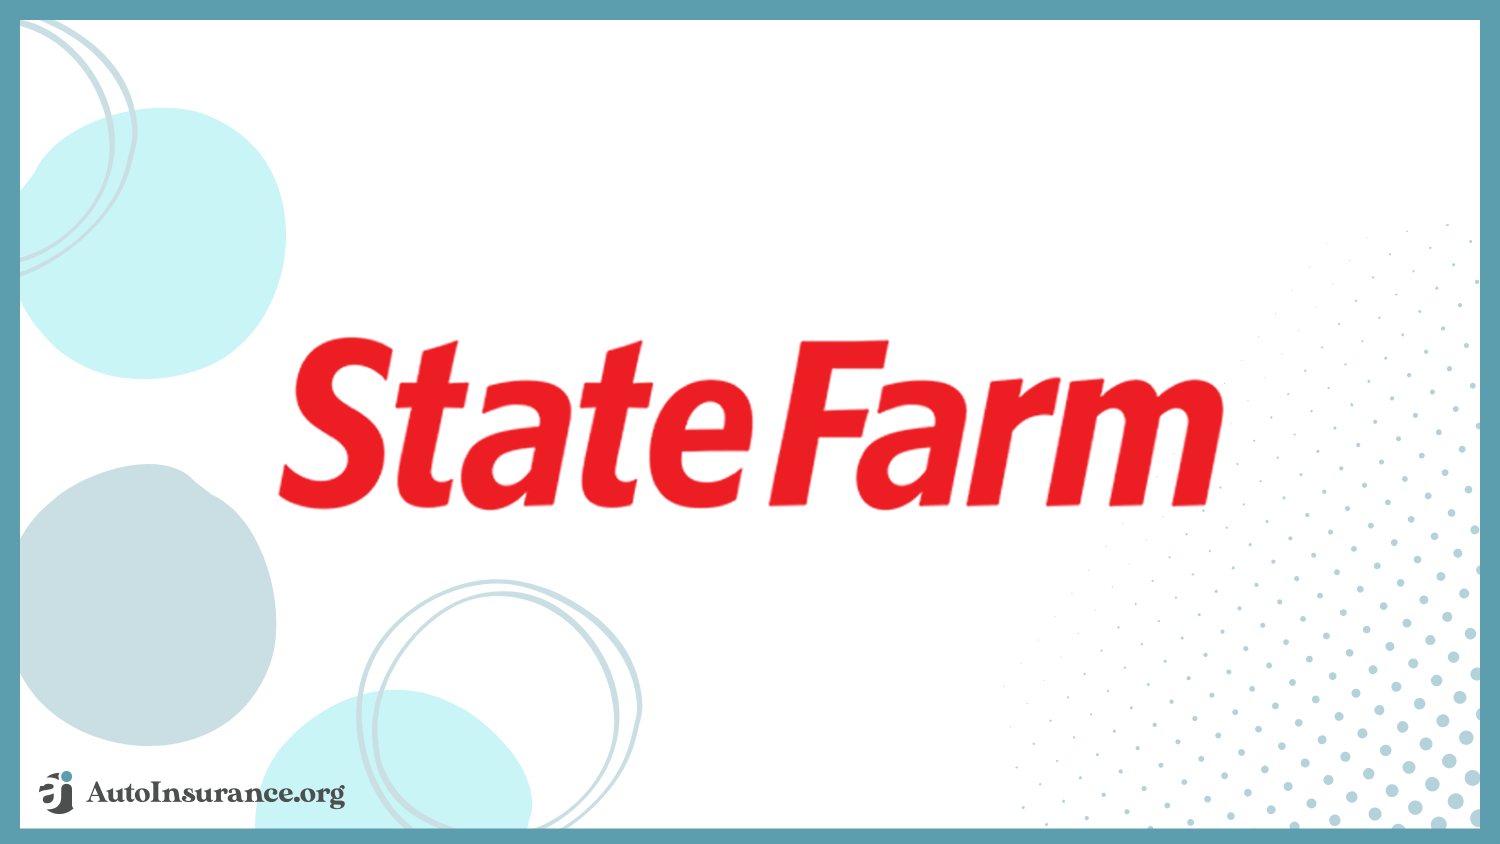 State Farm cheap auto insurance for driving tests